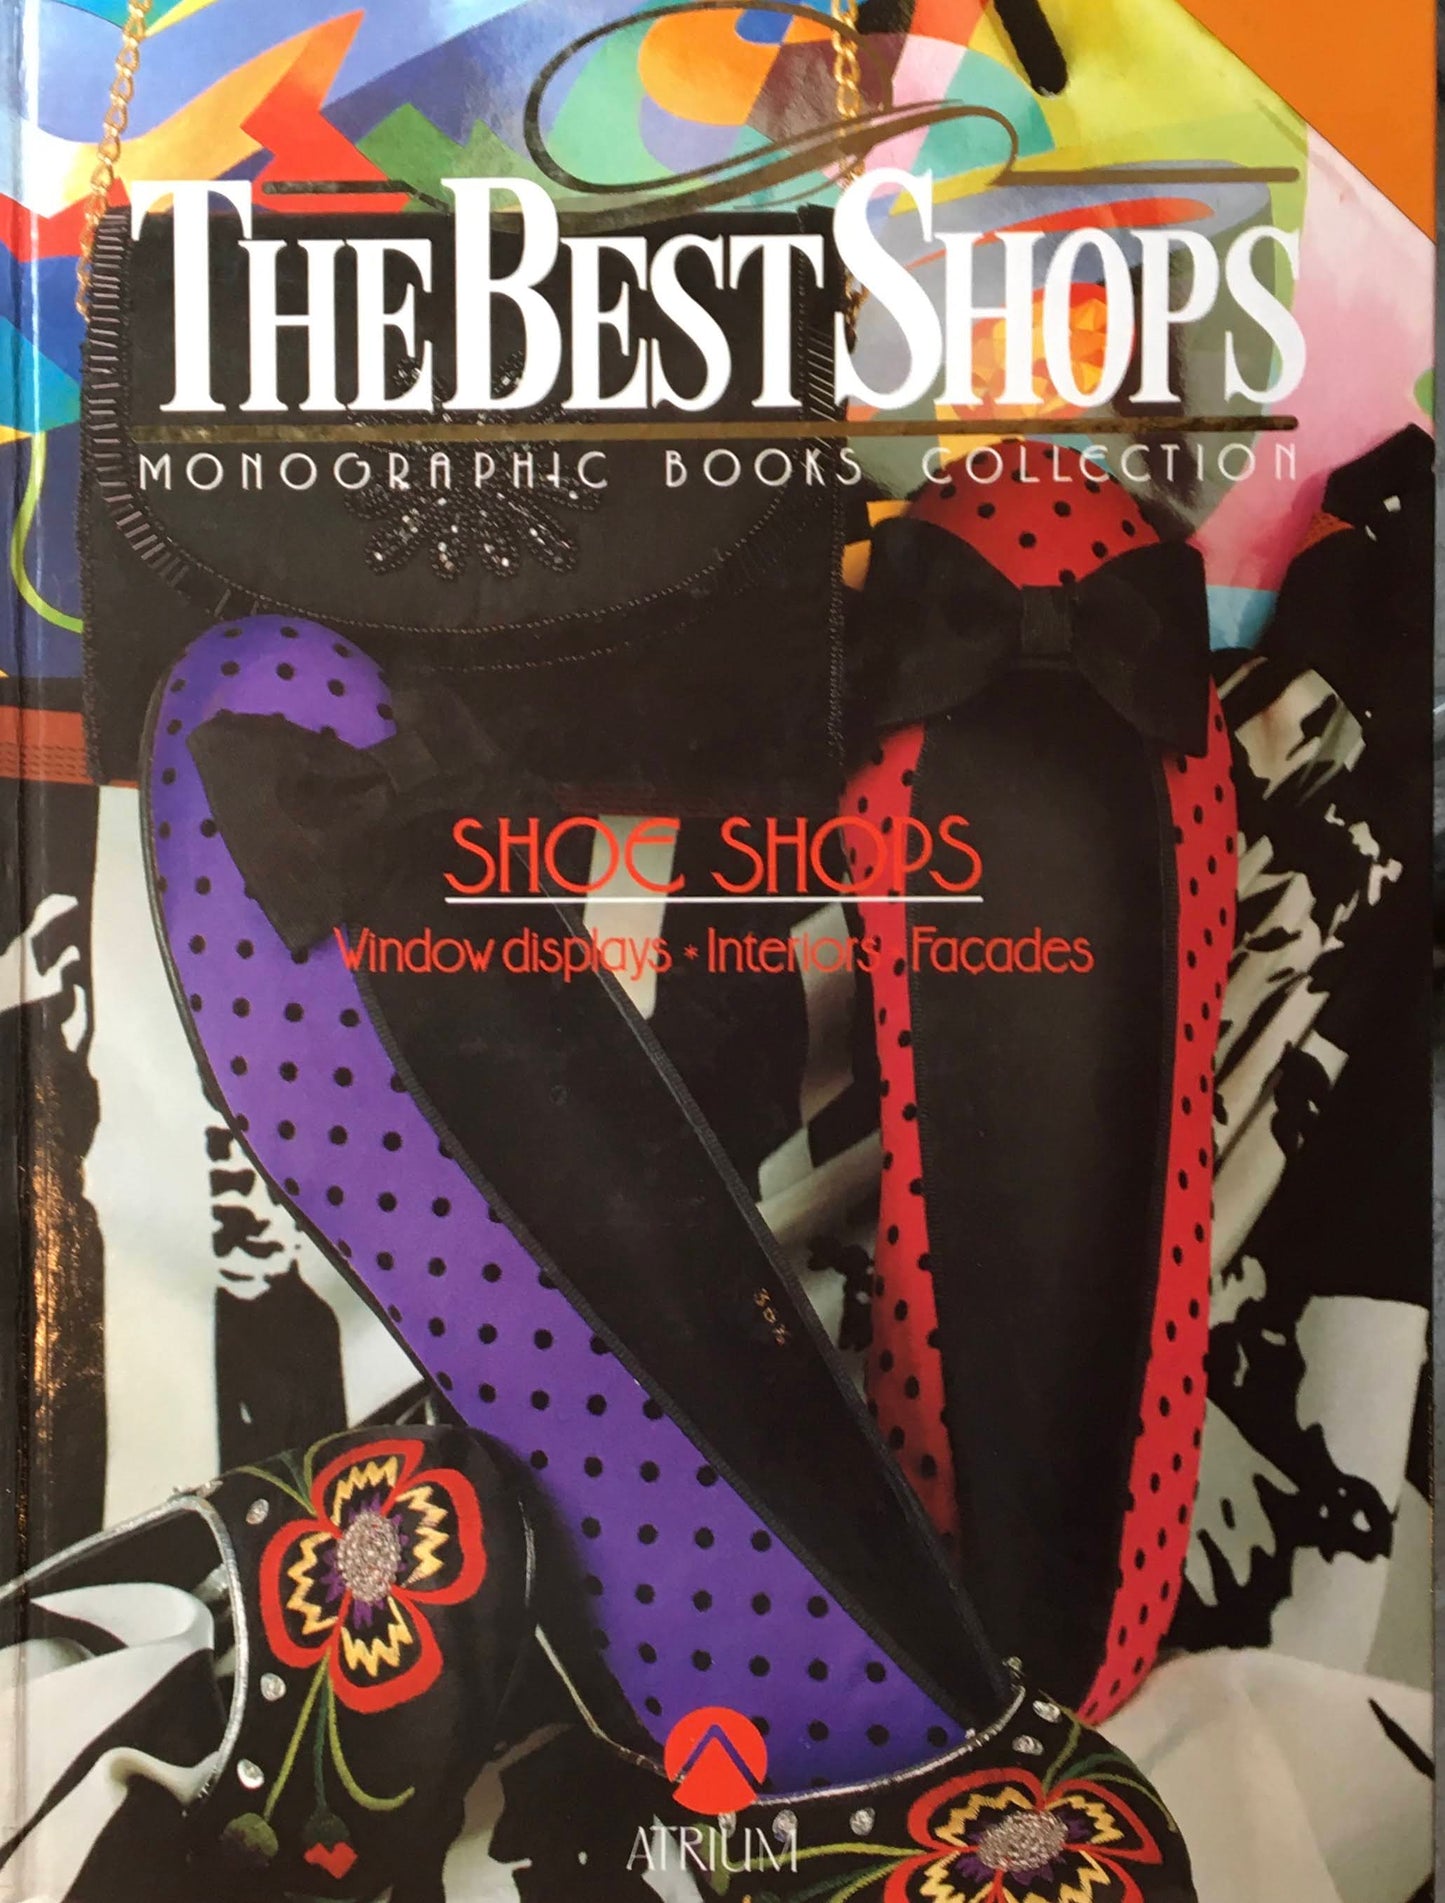 THE BEST SHOPS MONOGRAPHIC BOOKS COLLECTION  SHOE SHOPS windows displays interiors facades